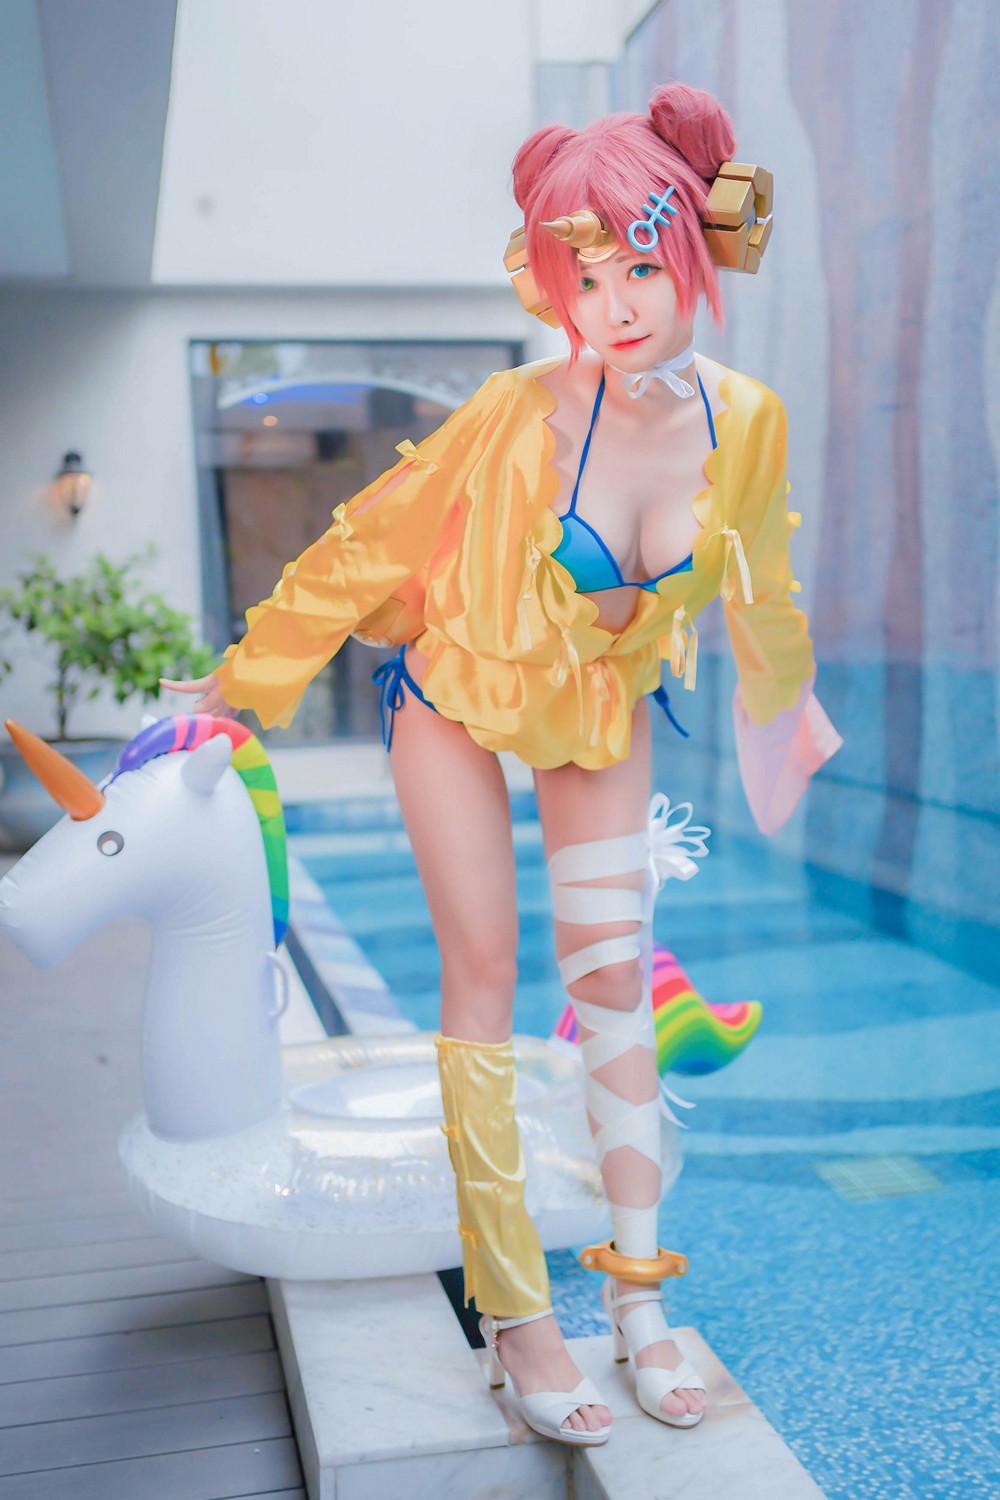 [Cosplay] Arty Huang - FGO Frankenstein swimsuit (2 sets) [32P] (6 February 2022) - COSPLAY -